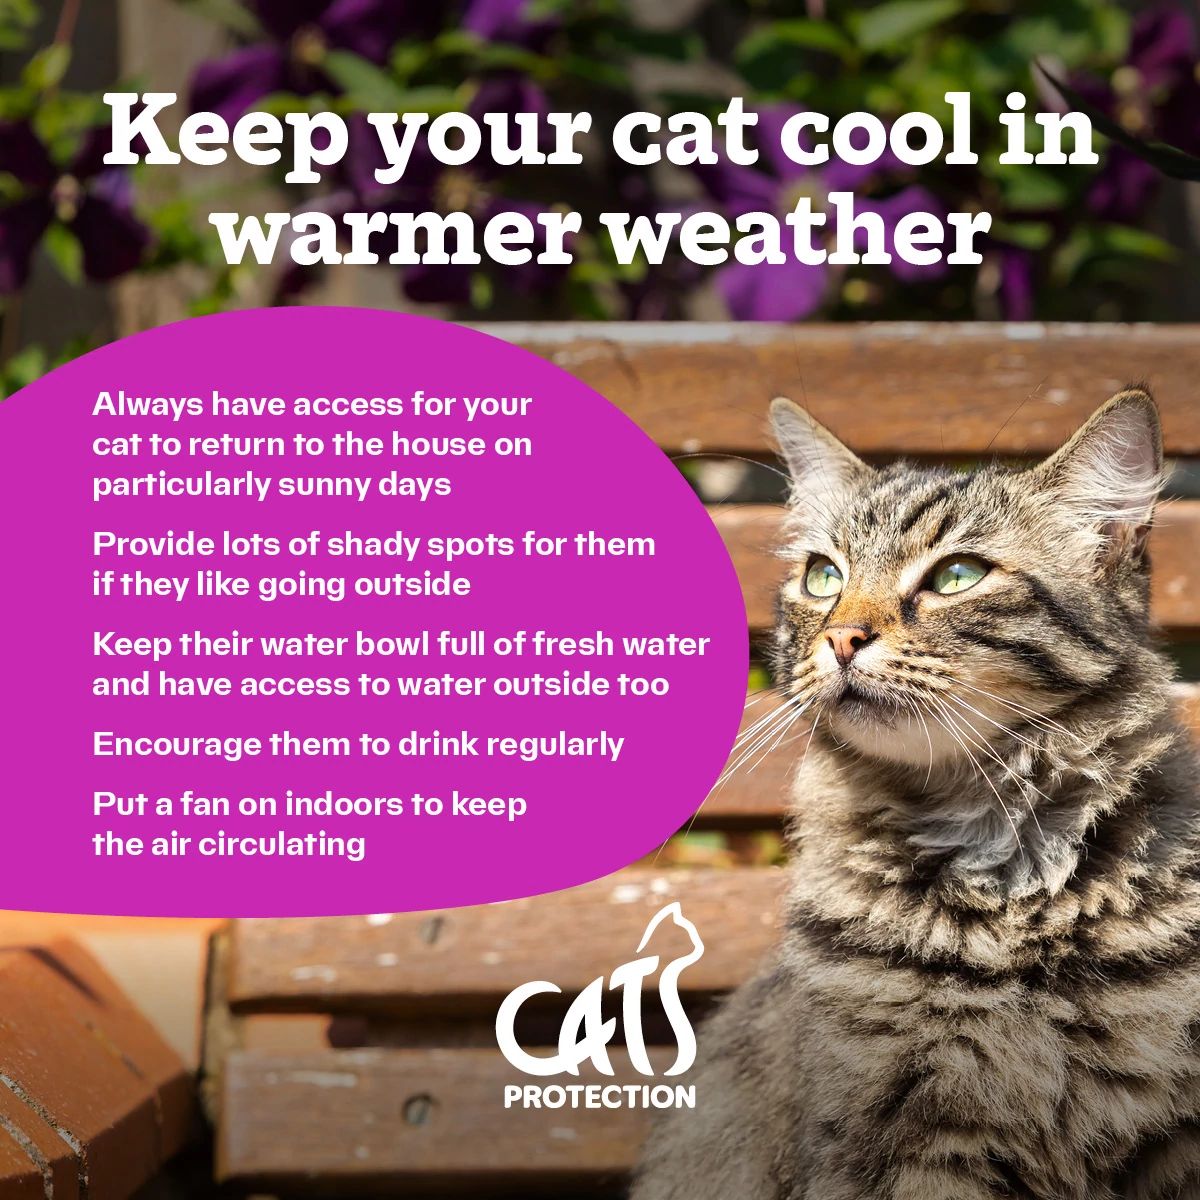 It’s #SunAwarenessWeek! Although our cats love to sleep in a sunbeam, we must ensure we are keeping our cats safe in the sun. Read more advice here: spr.ly/CatsAndWarmerW… ☀️